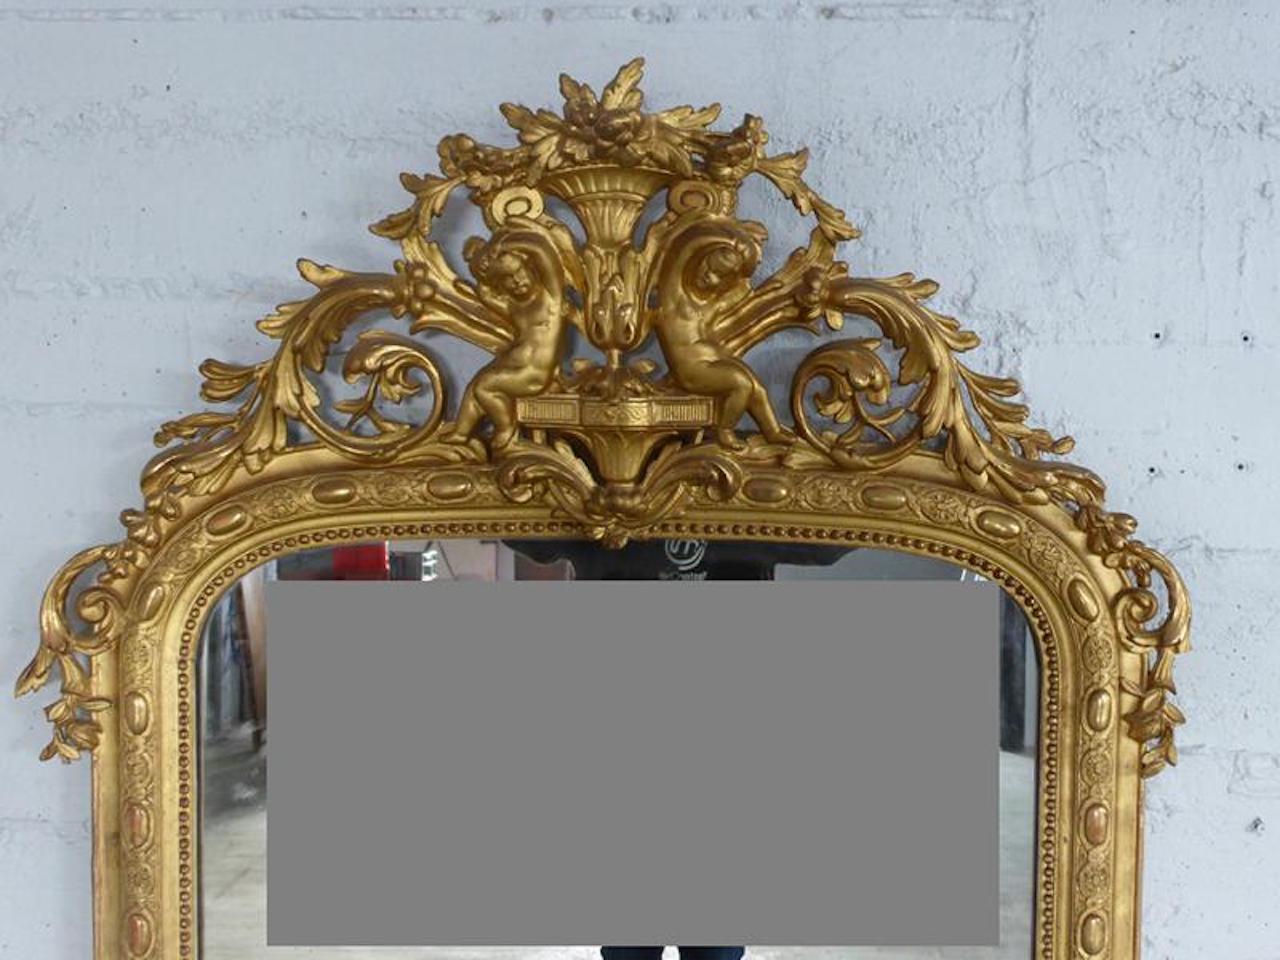 Beautiful mirror with cherubs in wood and gilded stucco from the Napoleon III period.
A very characteristic mirror from the end of the 19th century.
Very good quality and condition.